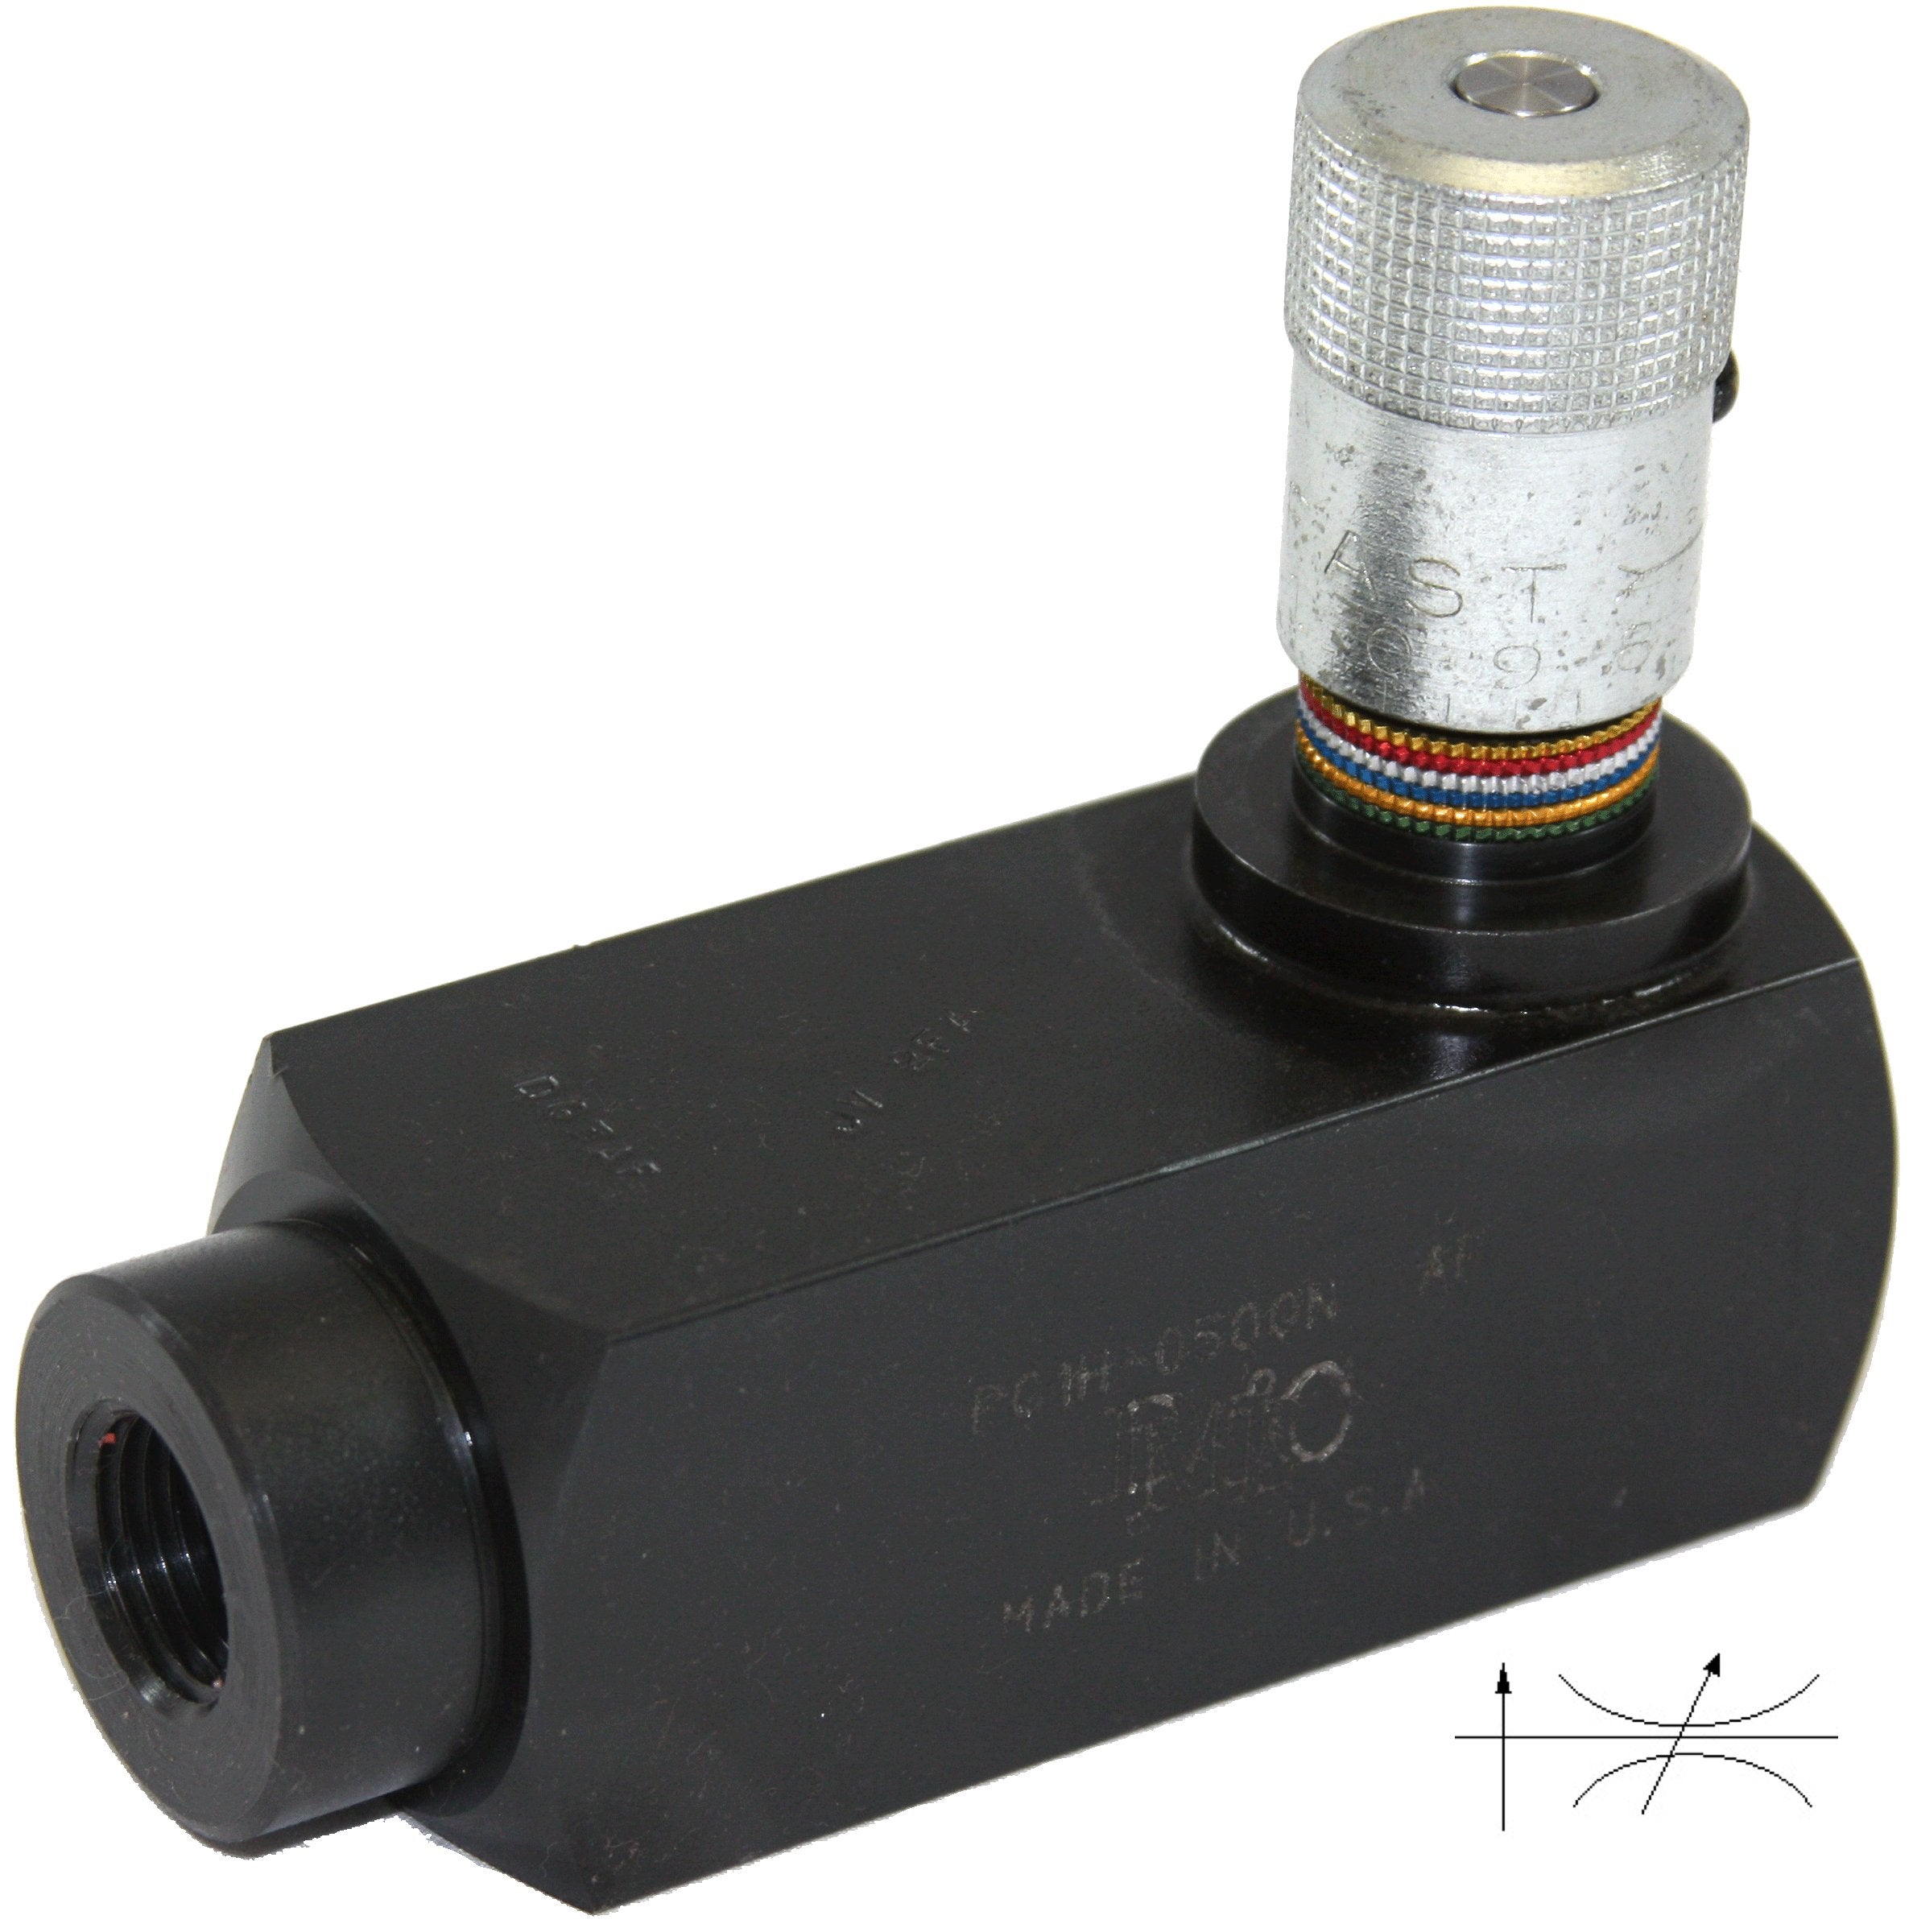 PC1H-0750S : DMIC Pressure Comp Flow Control, Unidirectional, Metered, with Check, #12 SAE (3/4"), 3000psi, Carbon Steel